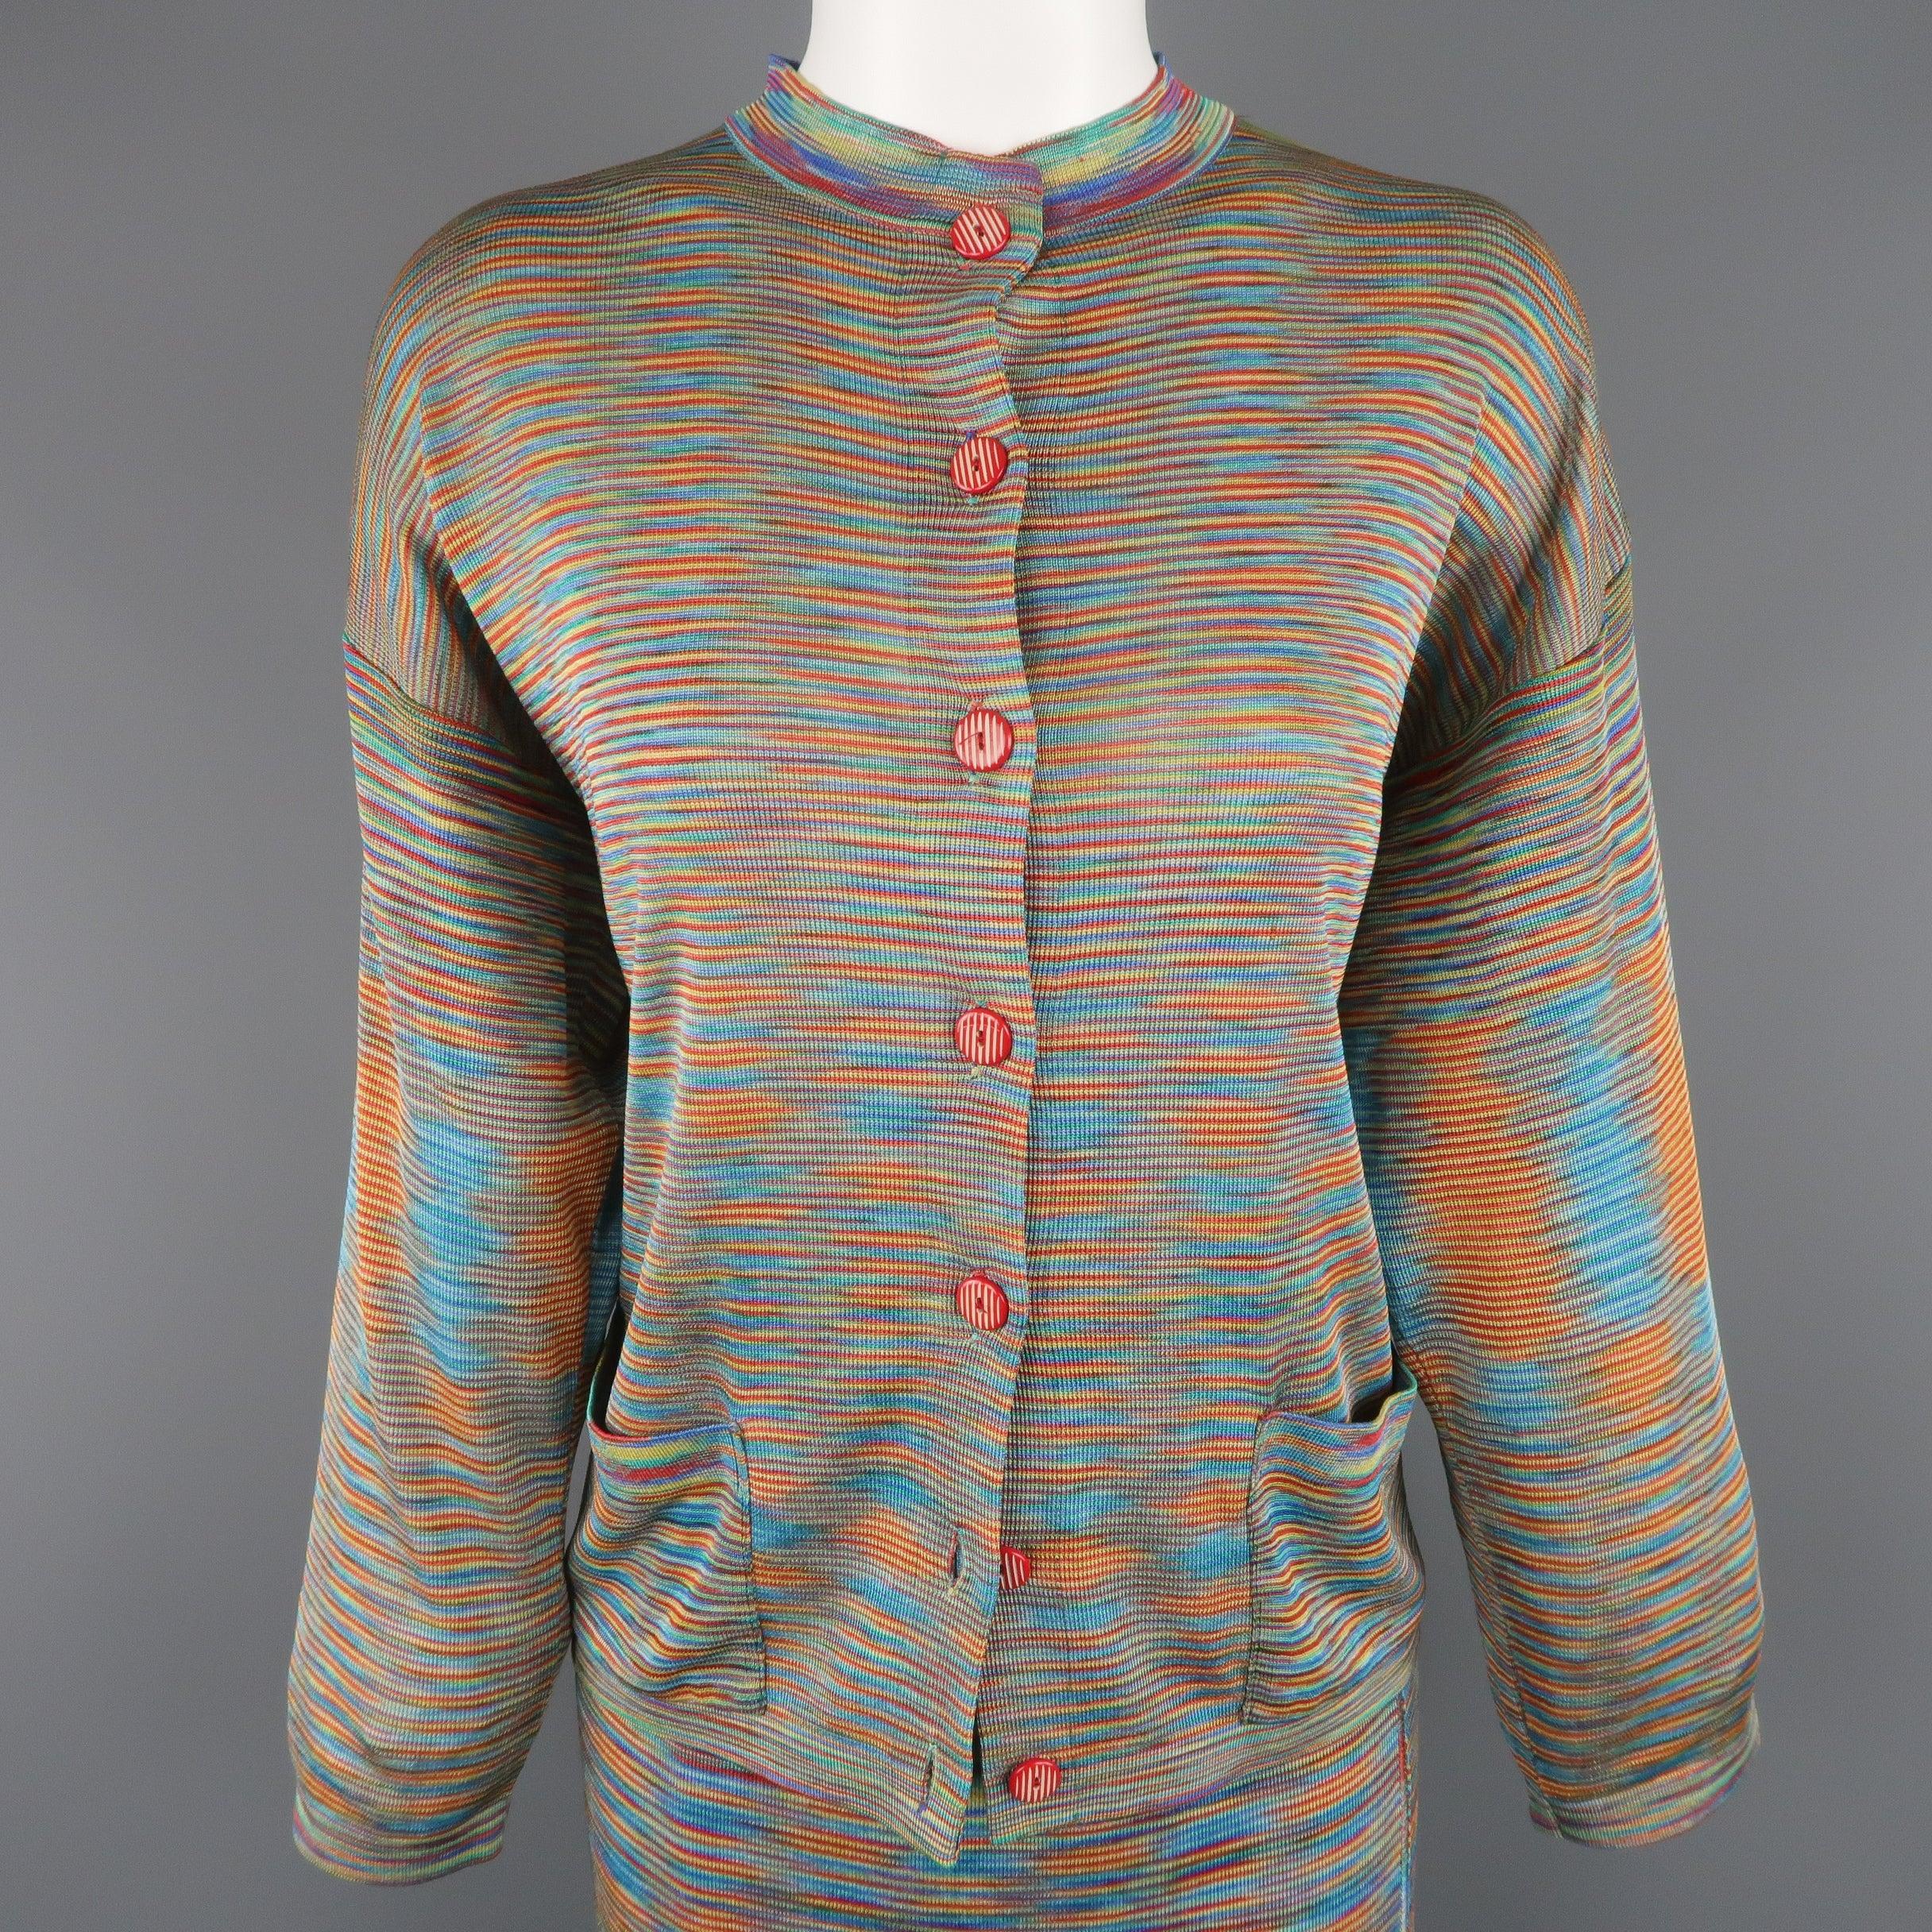 Vintage MISSONI ensemble comes in multi-color moire stripe rayon knit and includes a crewneck cardigan with red buttons and matching A line skirt with slit. Made in Italy.
Excellent Pre-Owned Condition.
 

Marked:   IT 44
 

Measurements: 
 